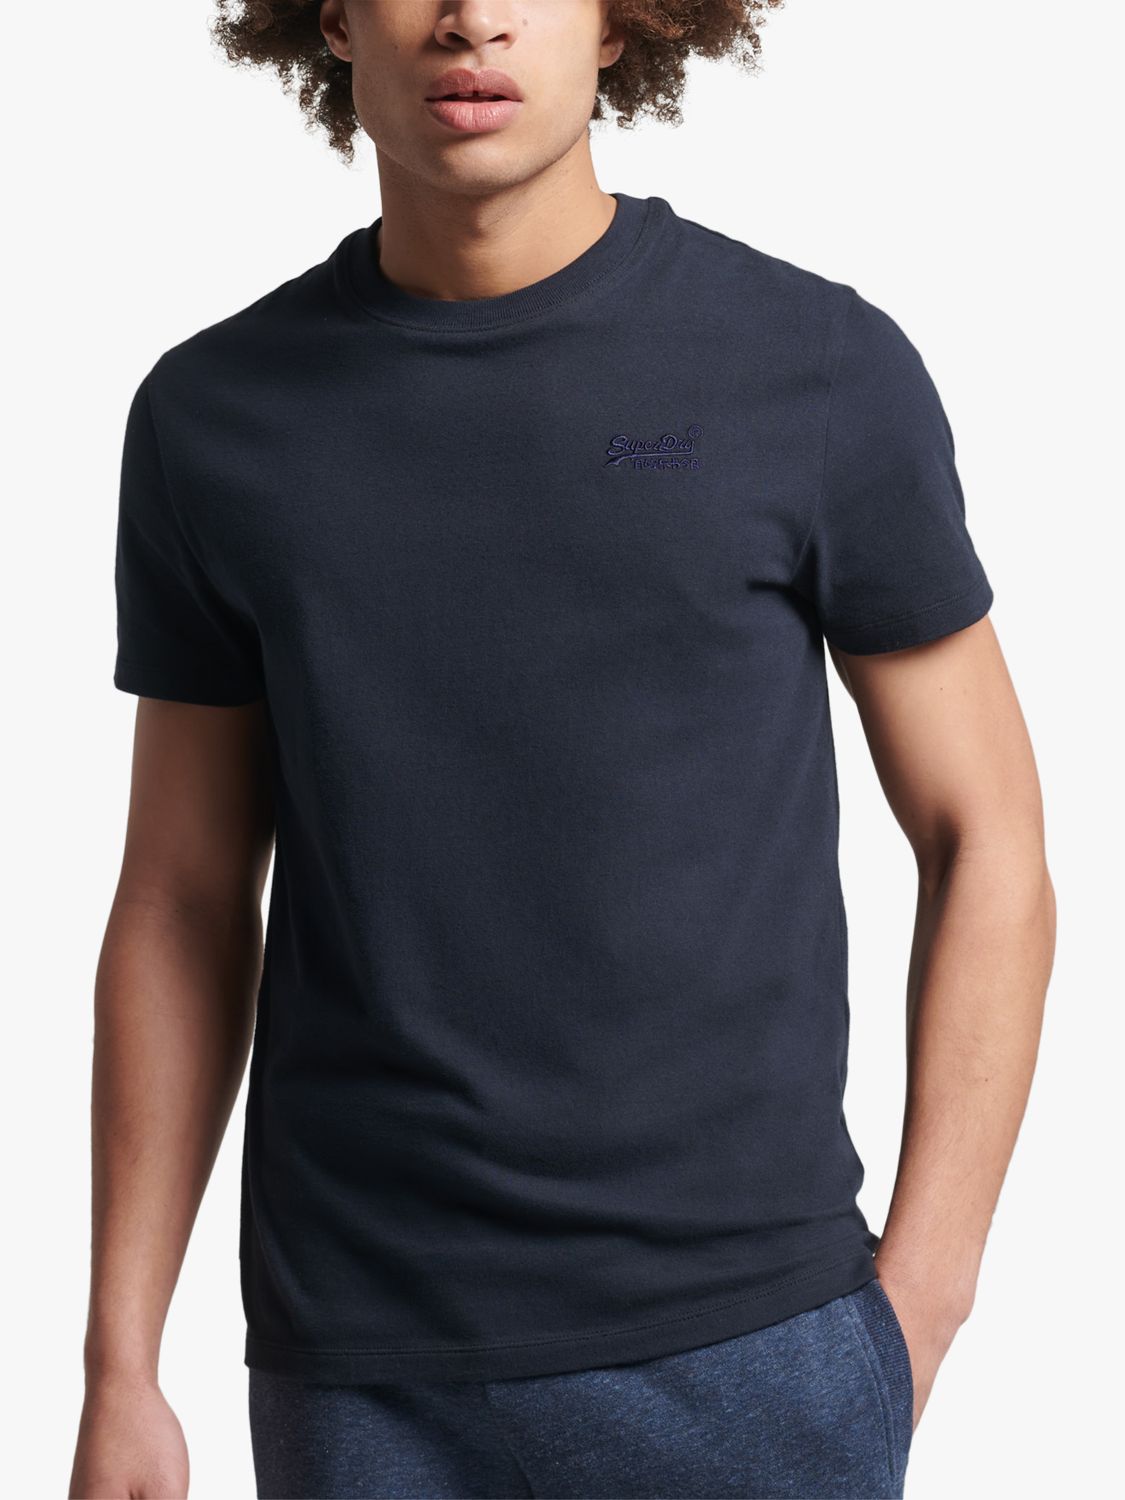 Superdry Organic Cotton Vintage Partners at T-Shirt, Embroidered Navy & Lewis Eclipse Logo John